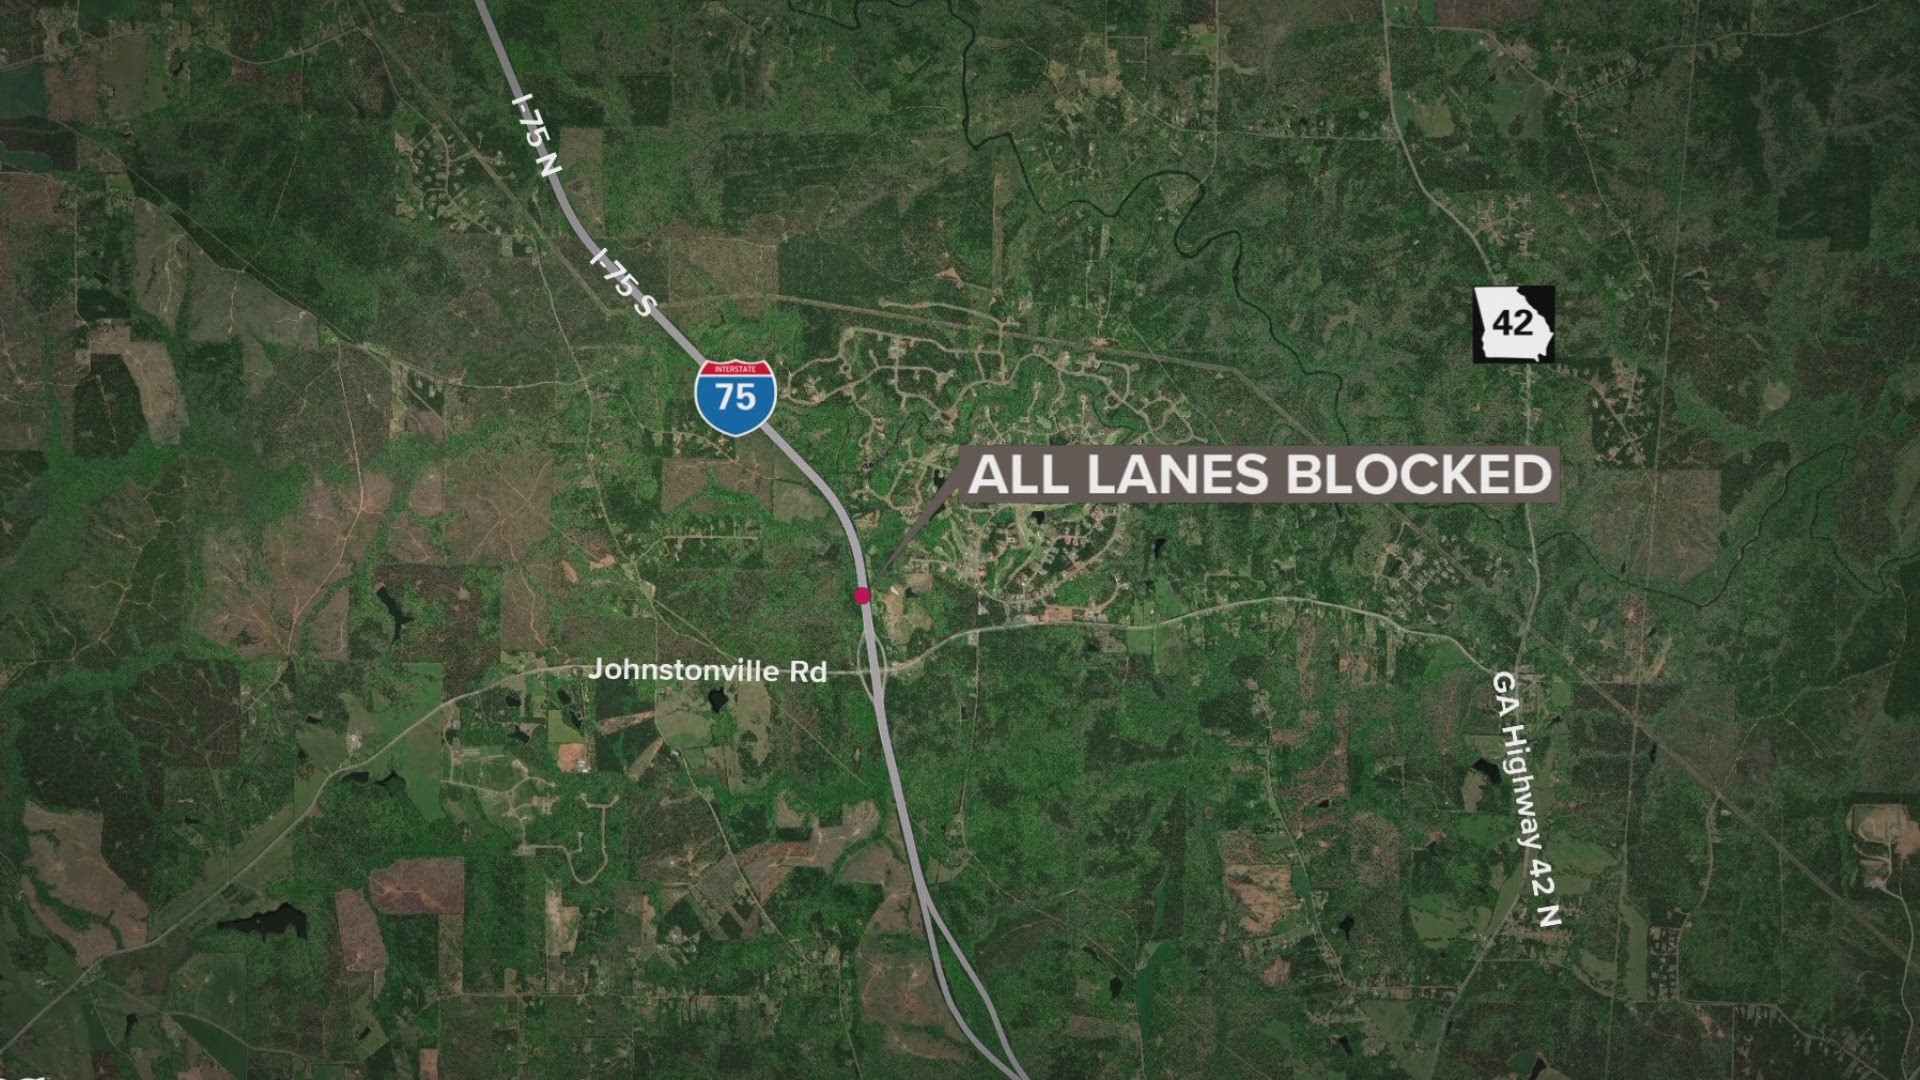 The Monroe County Sheriff's Office said the wreck is near mile marker 193. An overturned 18-wheeler is blocking lanes.